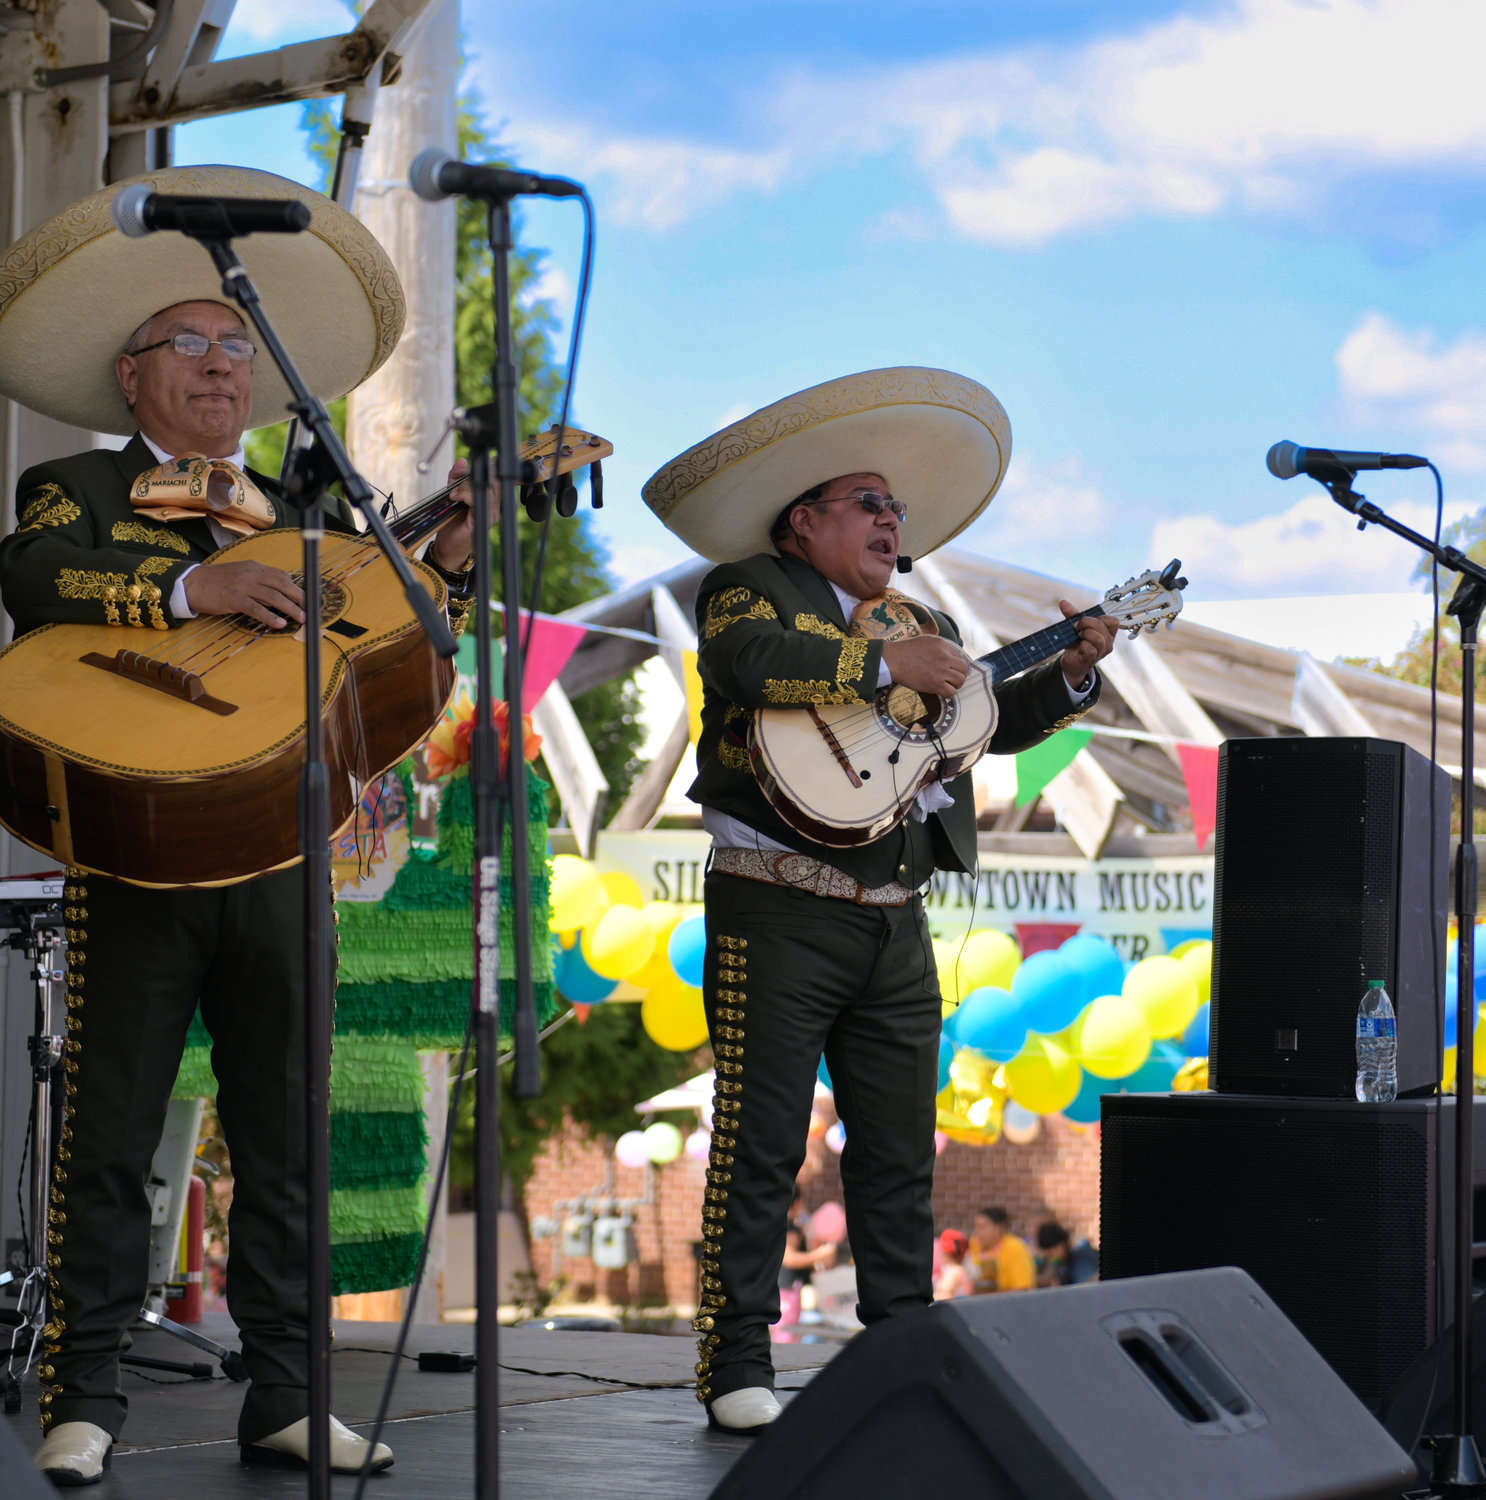 The Mariachi Mexico 2000 band kicks off the events for Saturday's Hispanic Heritage Festival in Siler City.